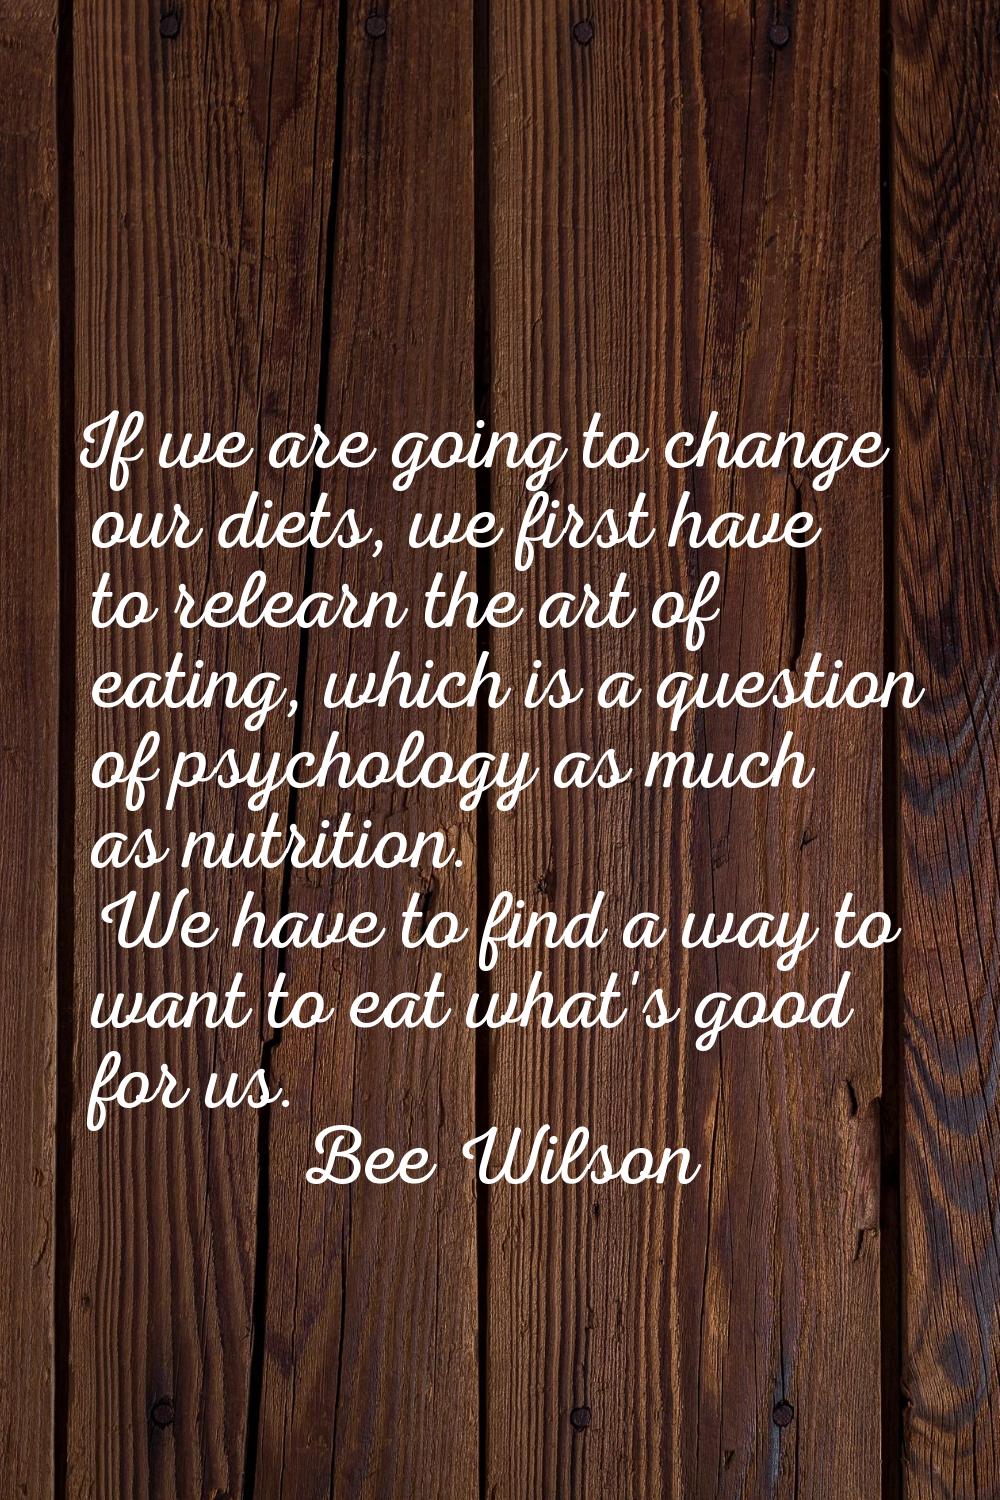 If we are going to change our diets, we first have to relearn the art of eating, which is a questio